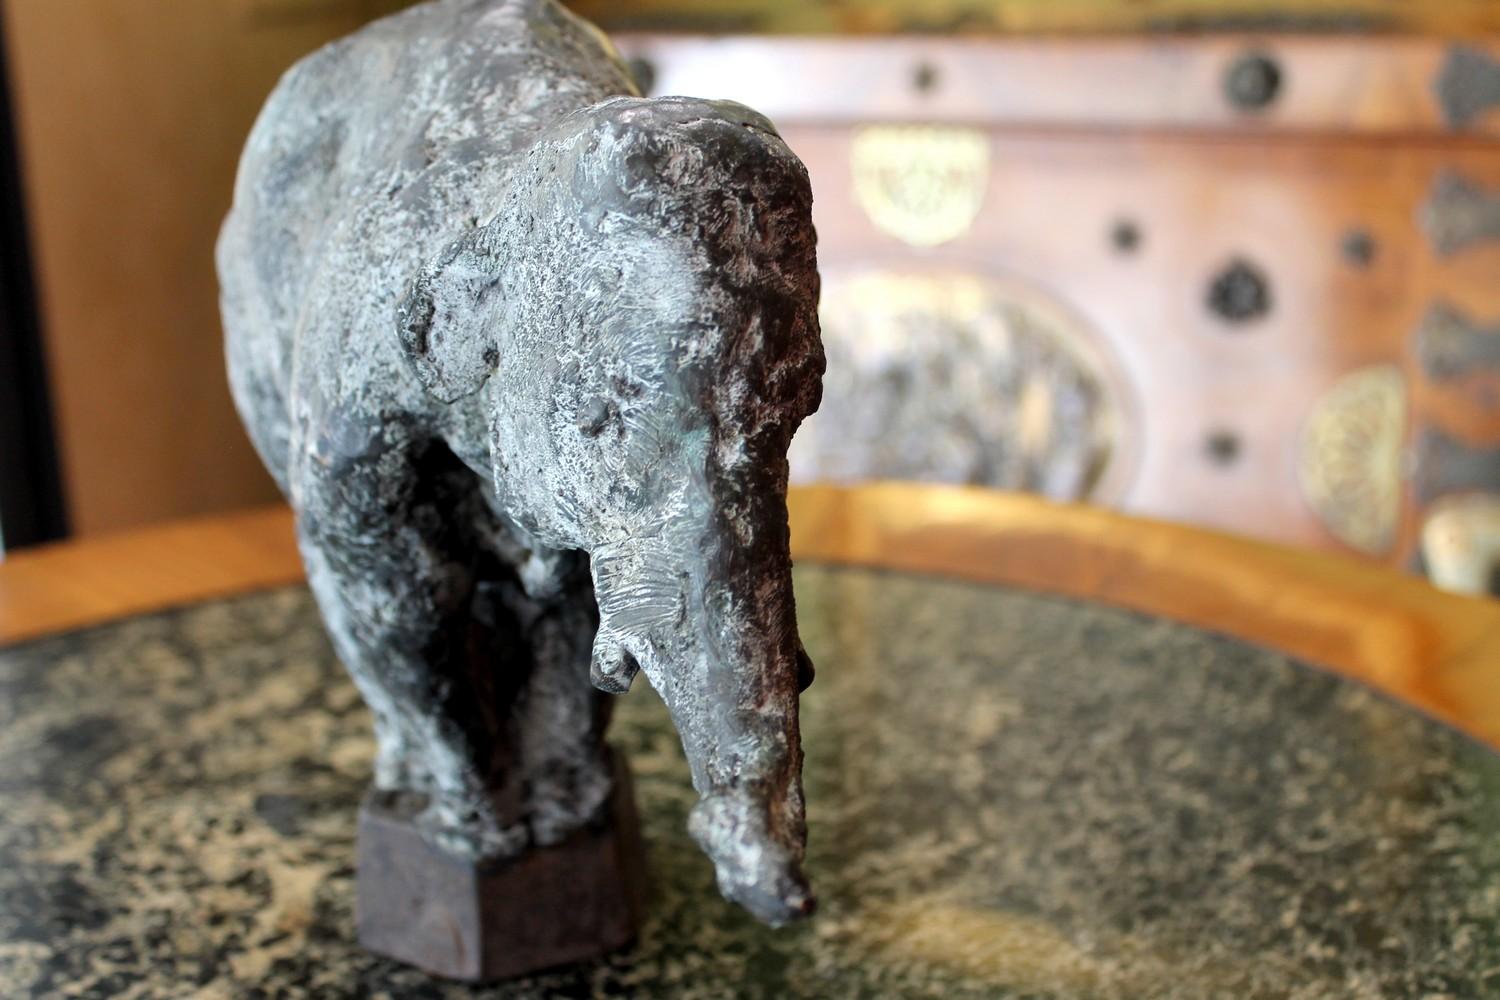 Elephant on Iron Pedestal, Lost Wax Casting Bronze Sculpture with Gray Patina - Gold Figurative Sculpture by Pablo Simunovic